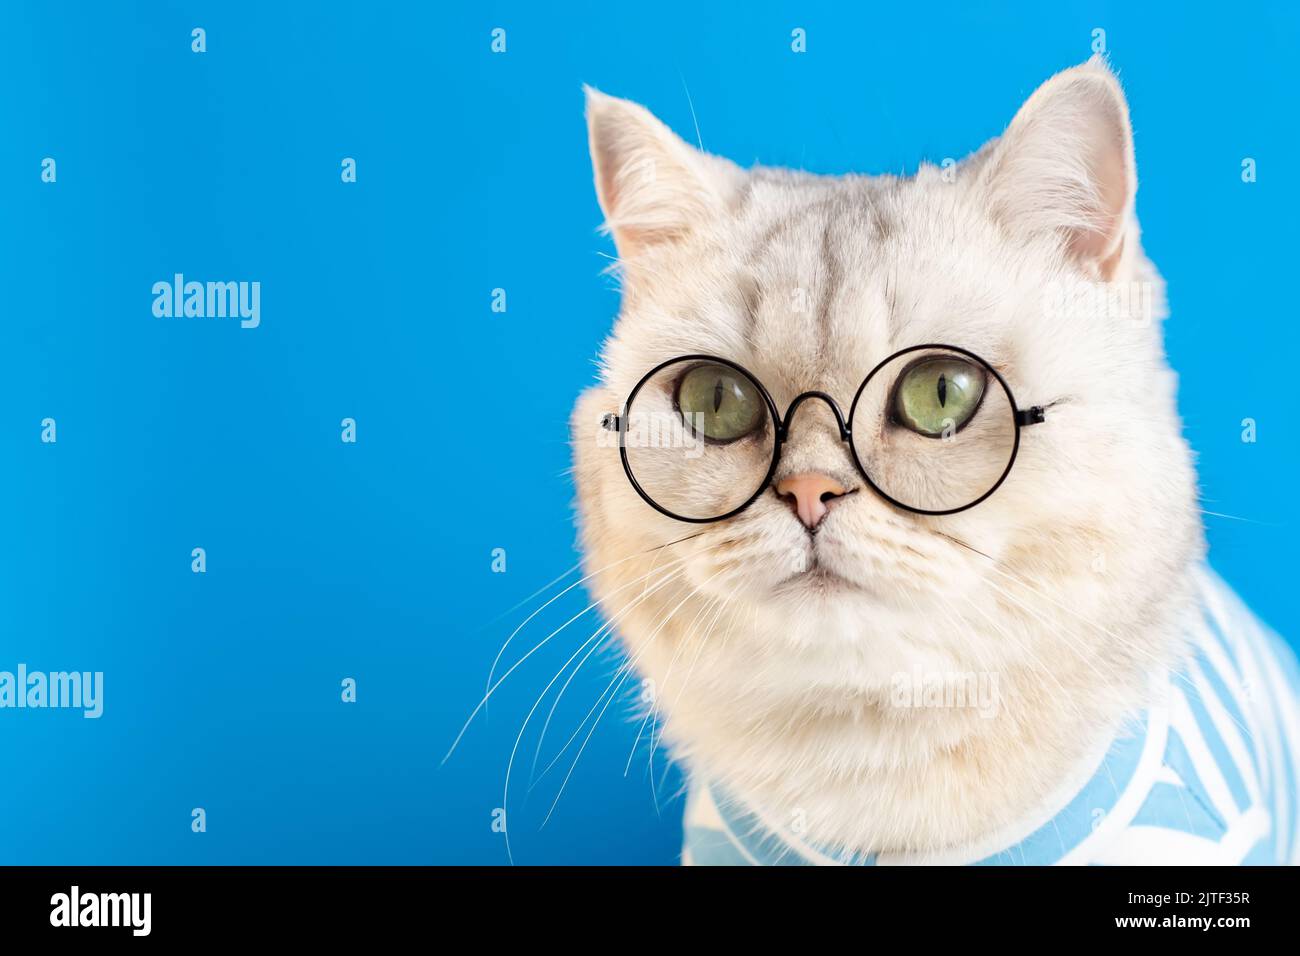 Portrait of a funny white cat in glasses and striped clothes on a blue background Stock Photo